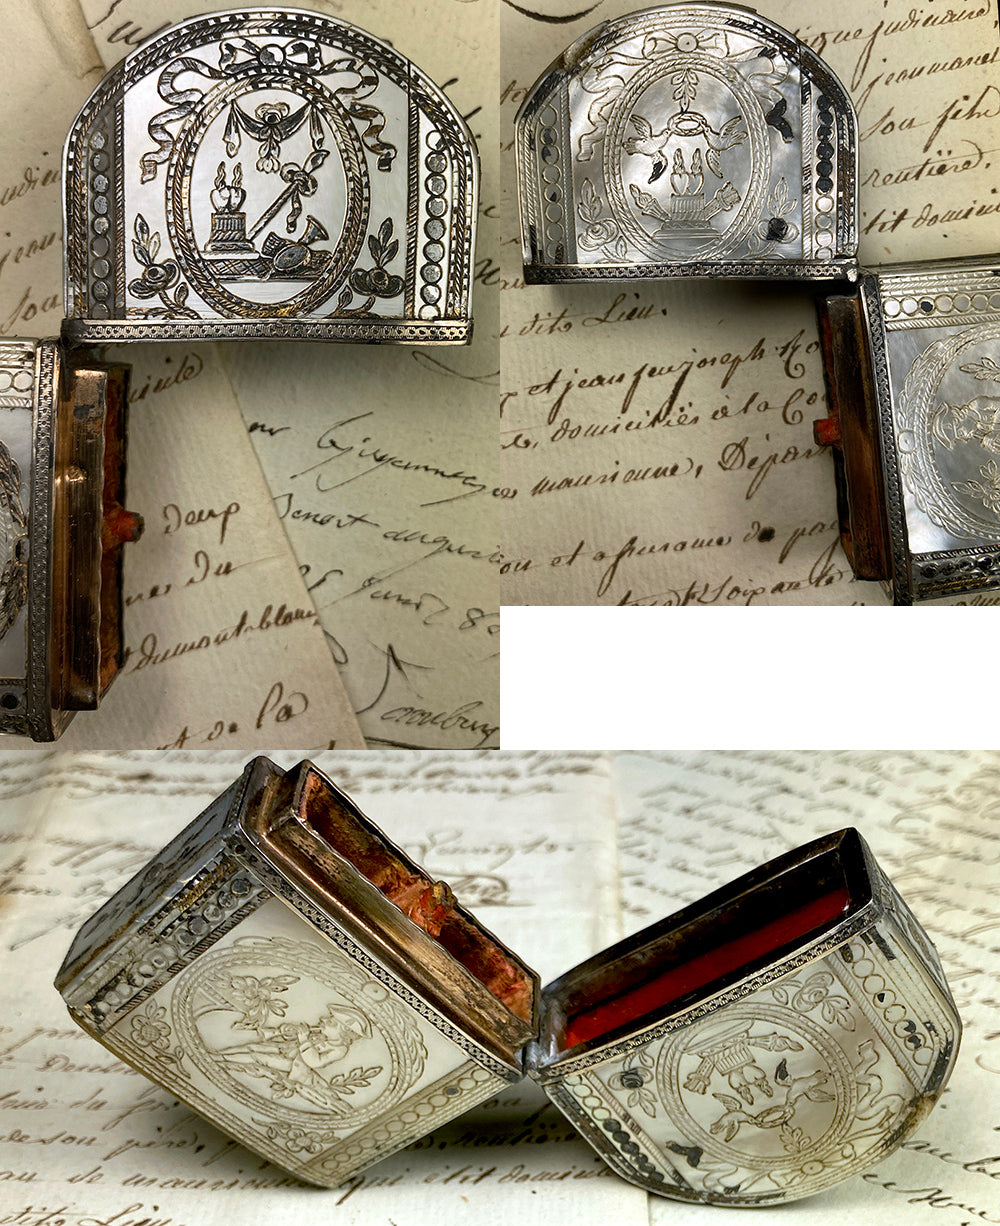 Antique French Mother of Pearl Scent or Perfume Etui, Case, Caddy, c.1750s, Foil in Gold, Silver